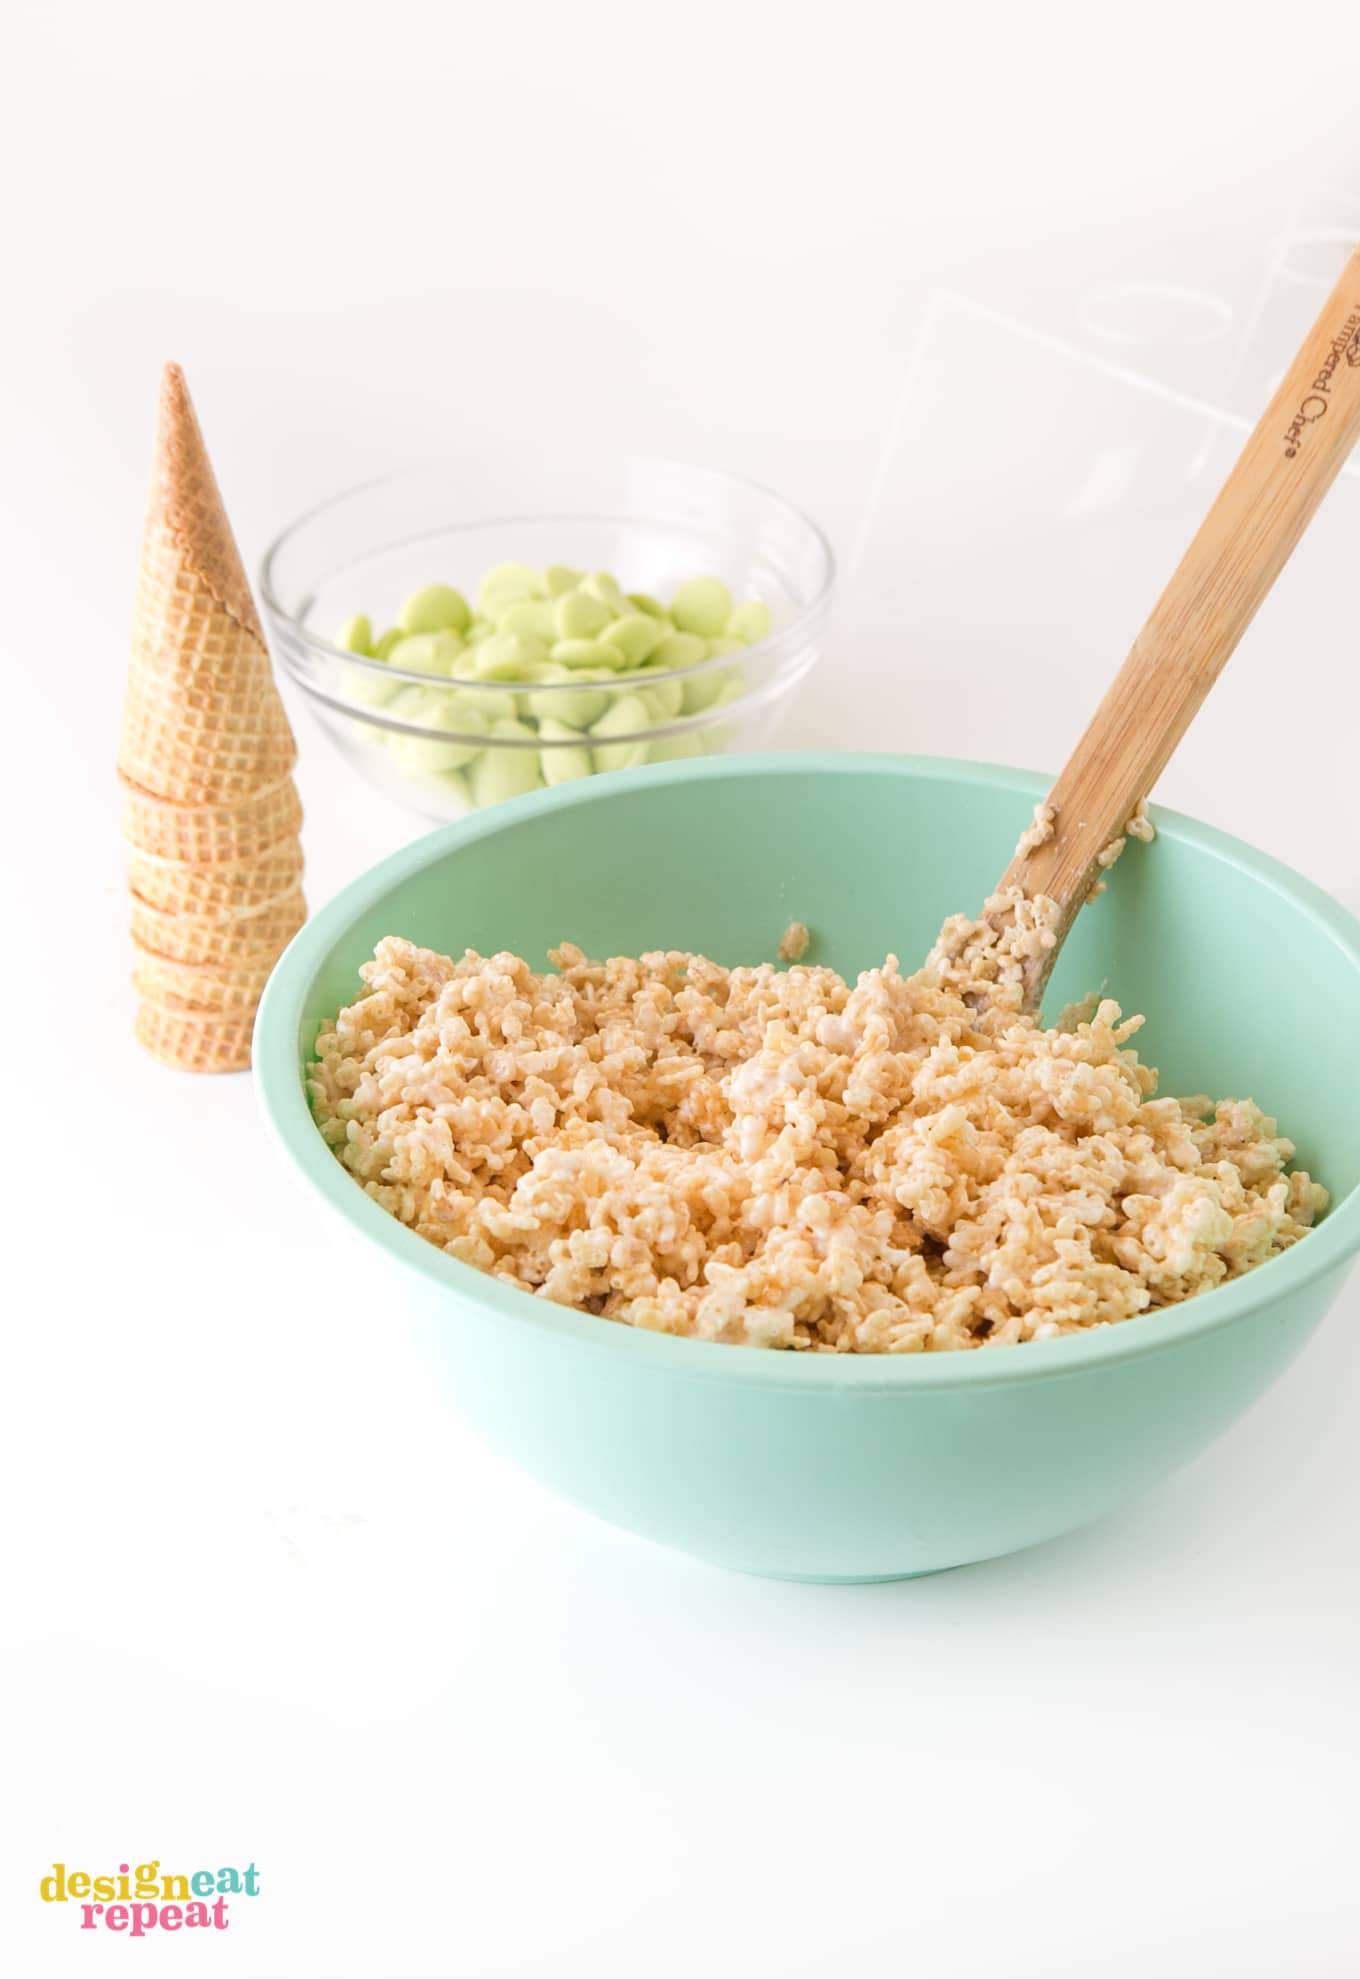 Mixing rice krispy cereal treats with wooden spoon in large blue bowl.